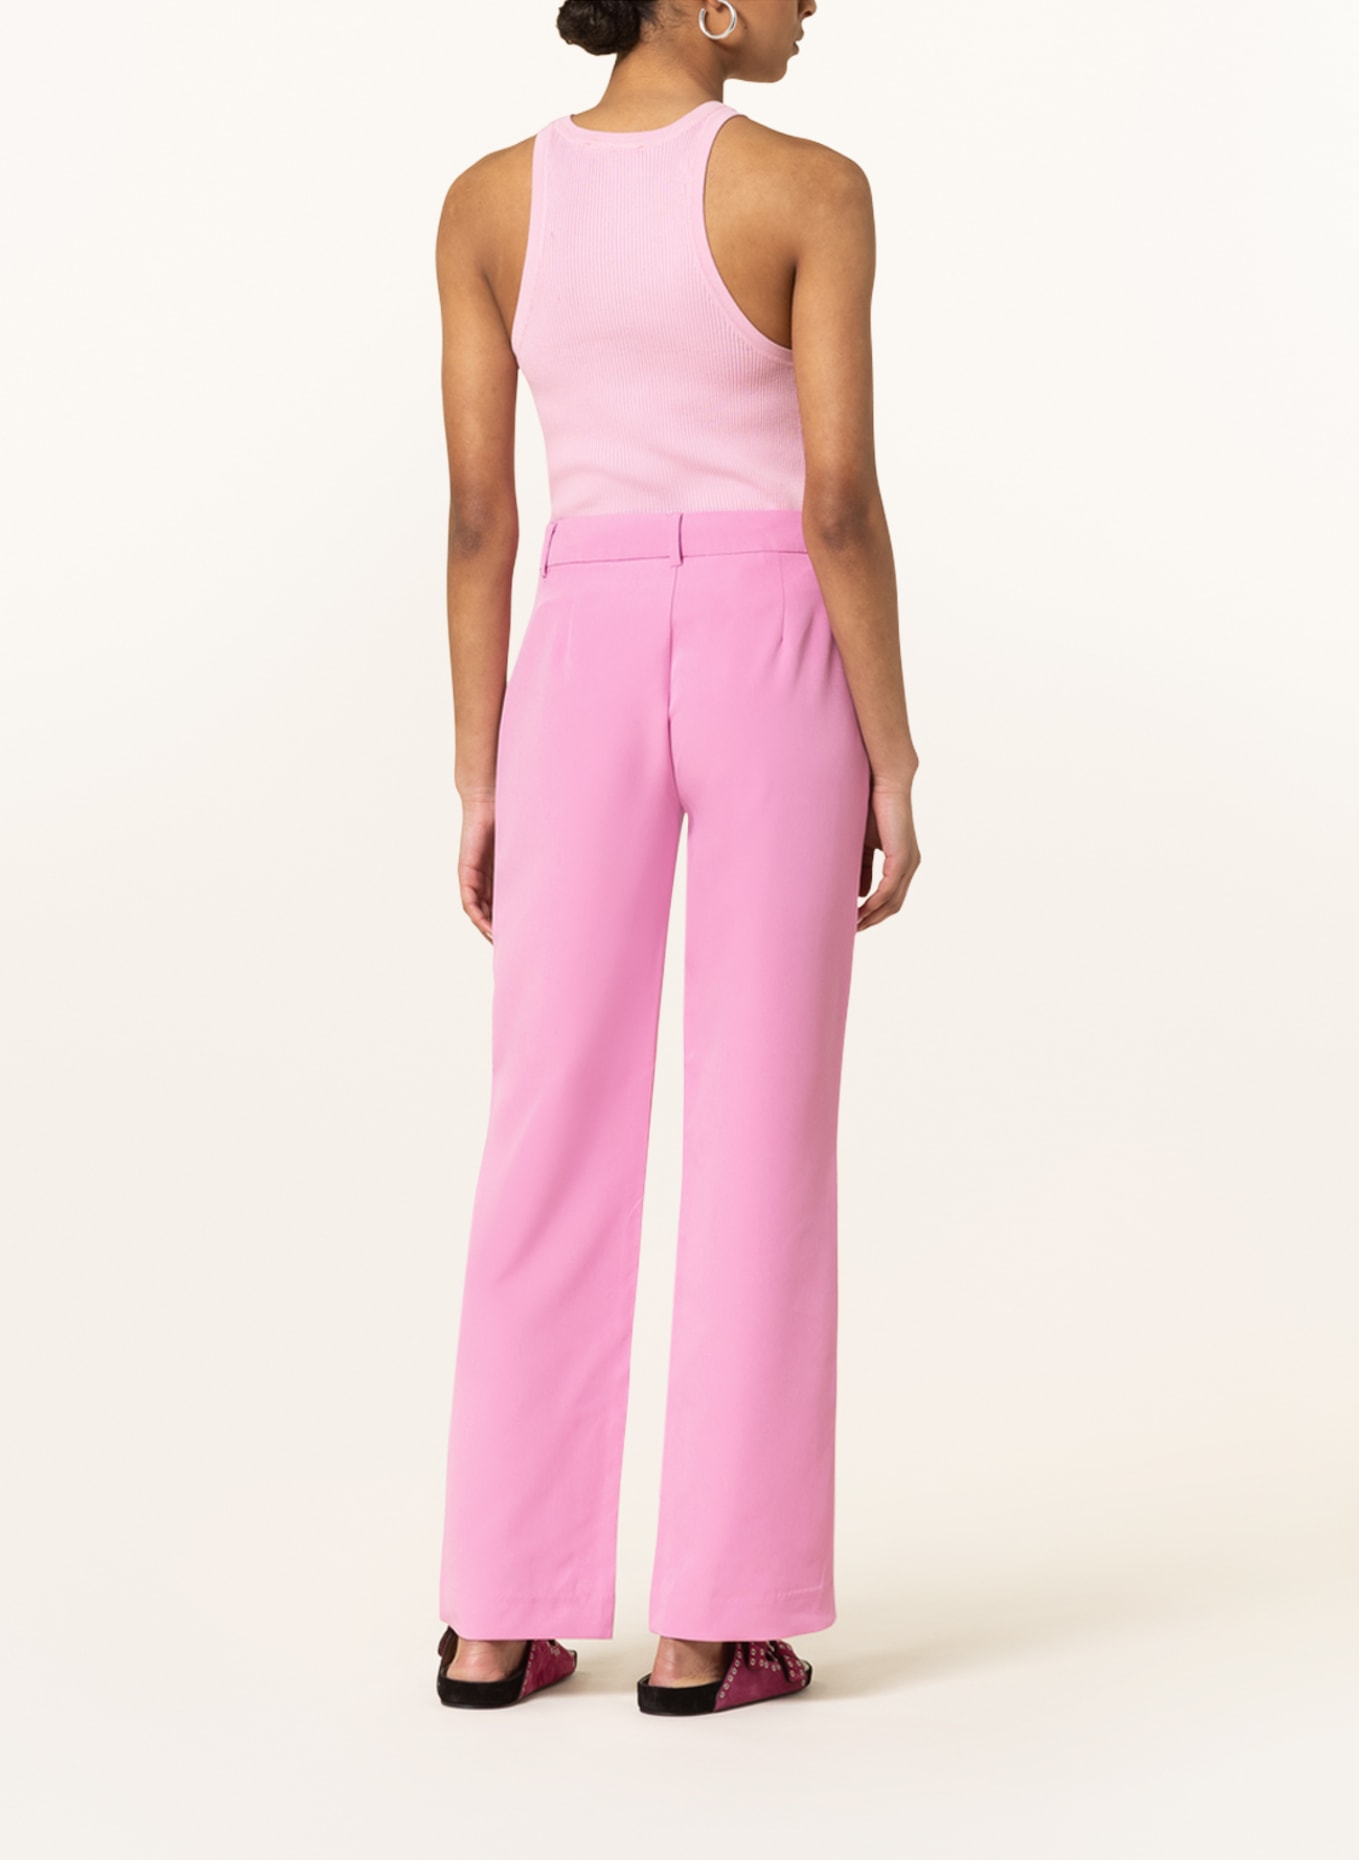 ONLY Pants, Color: PINK (Image 3)